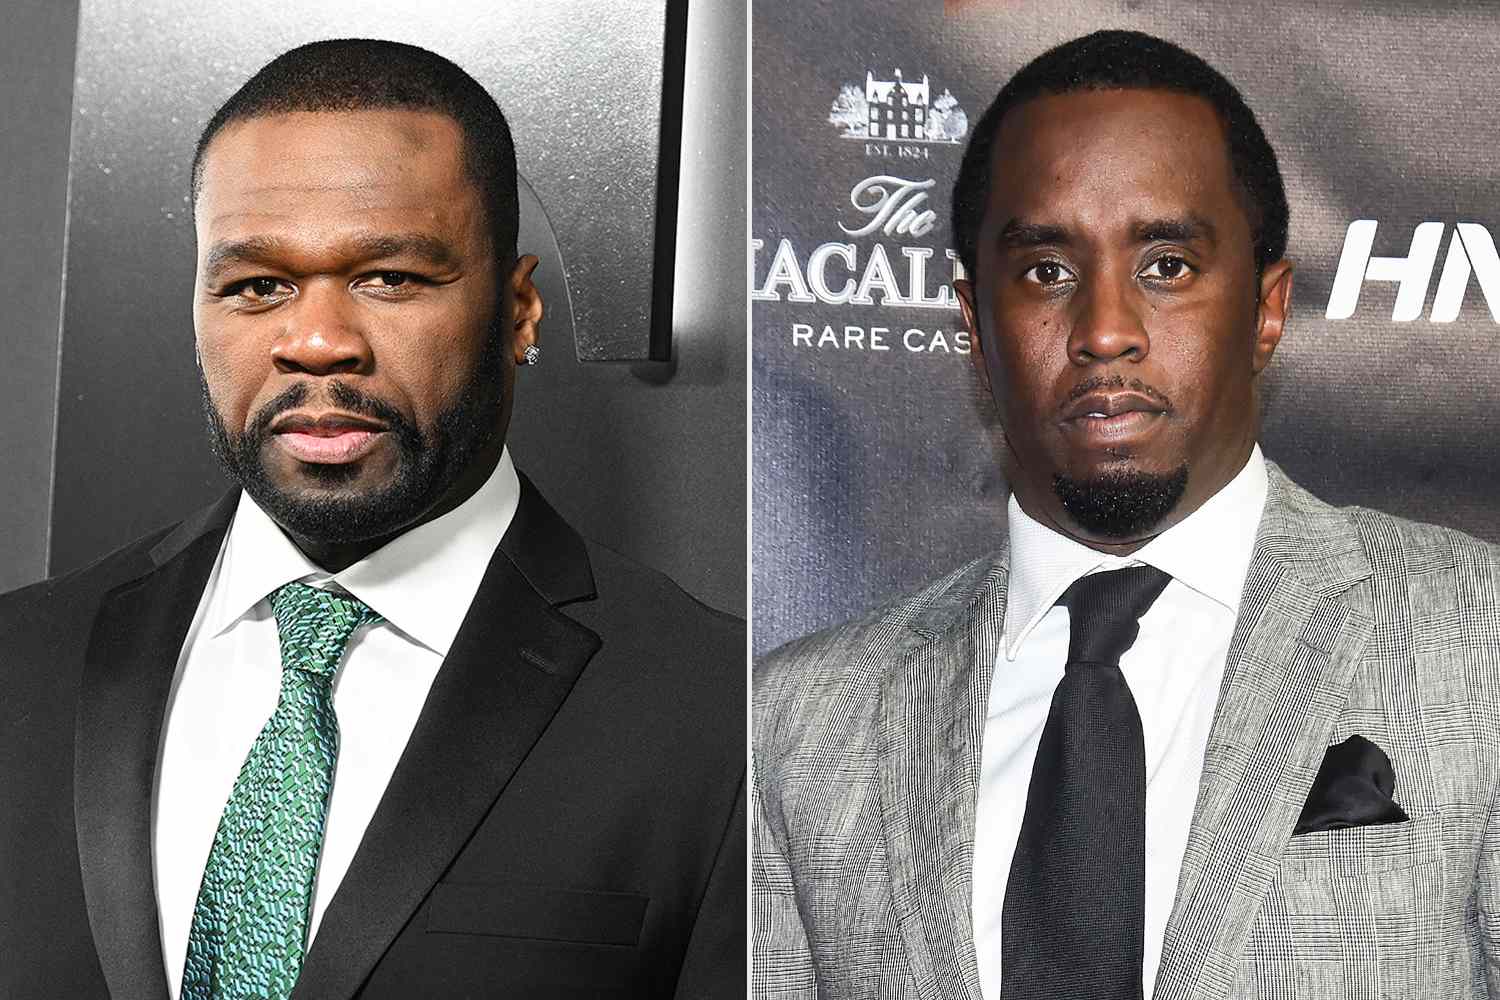 50 Cent Says There's an 'Uncomfortable Energy' Connected to Diddy's Parties: 'I've Been Very Vocal About Not Going'